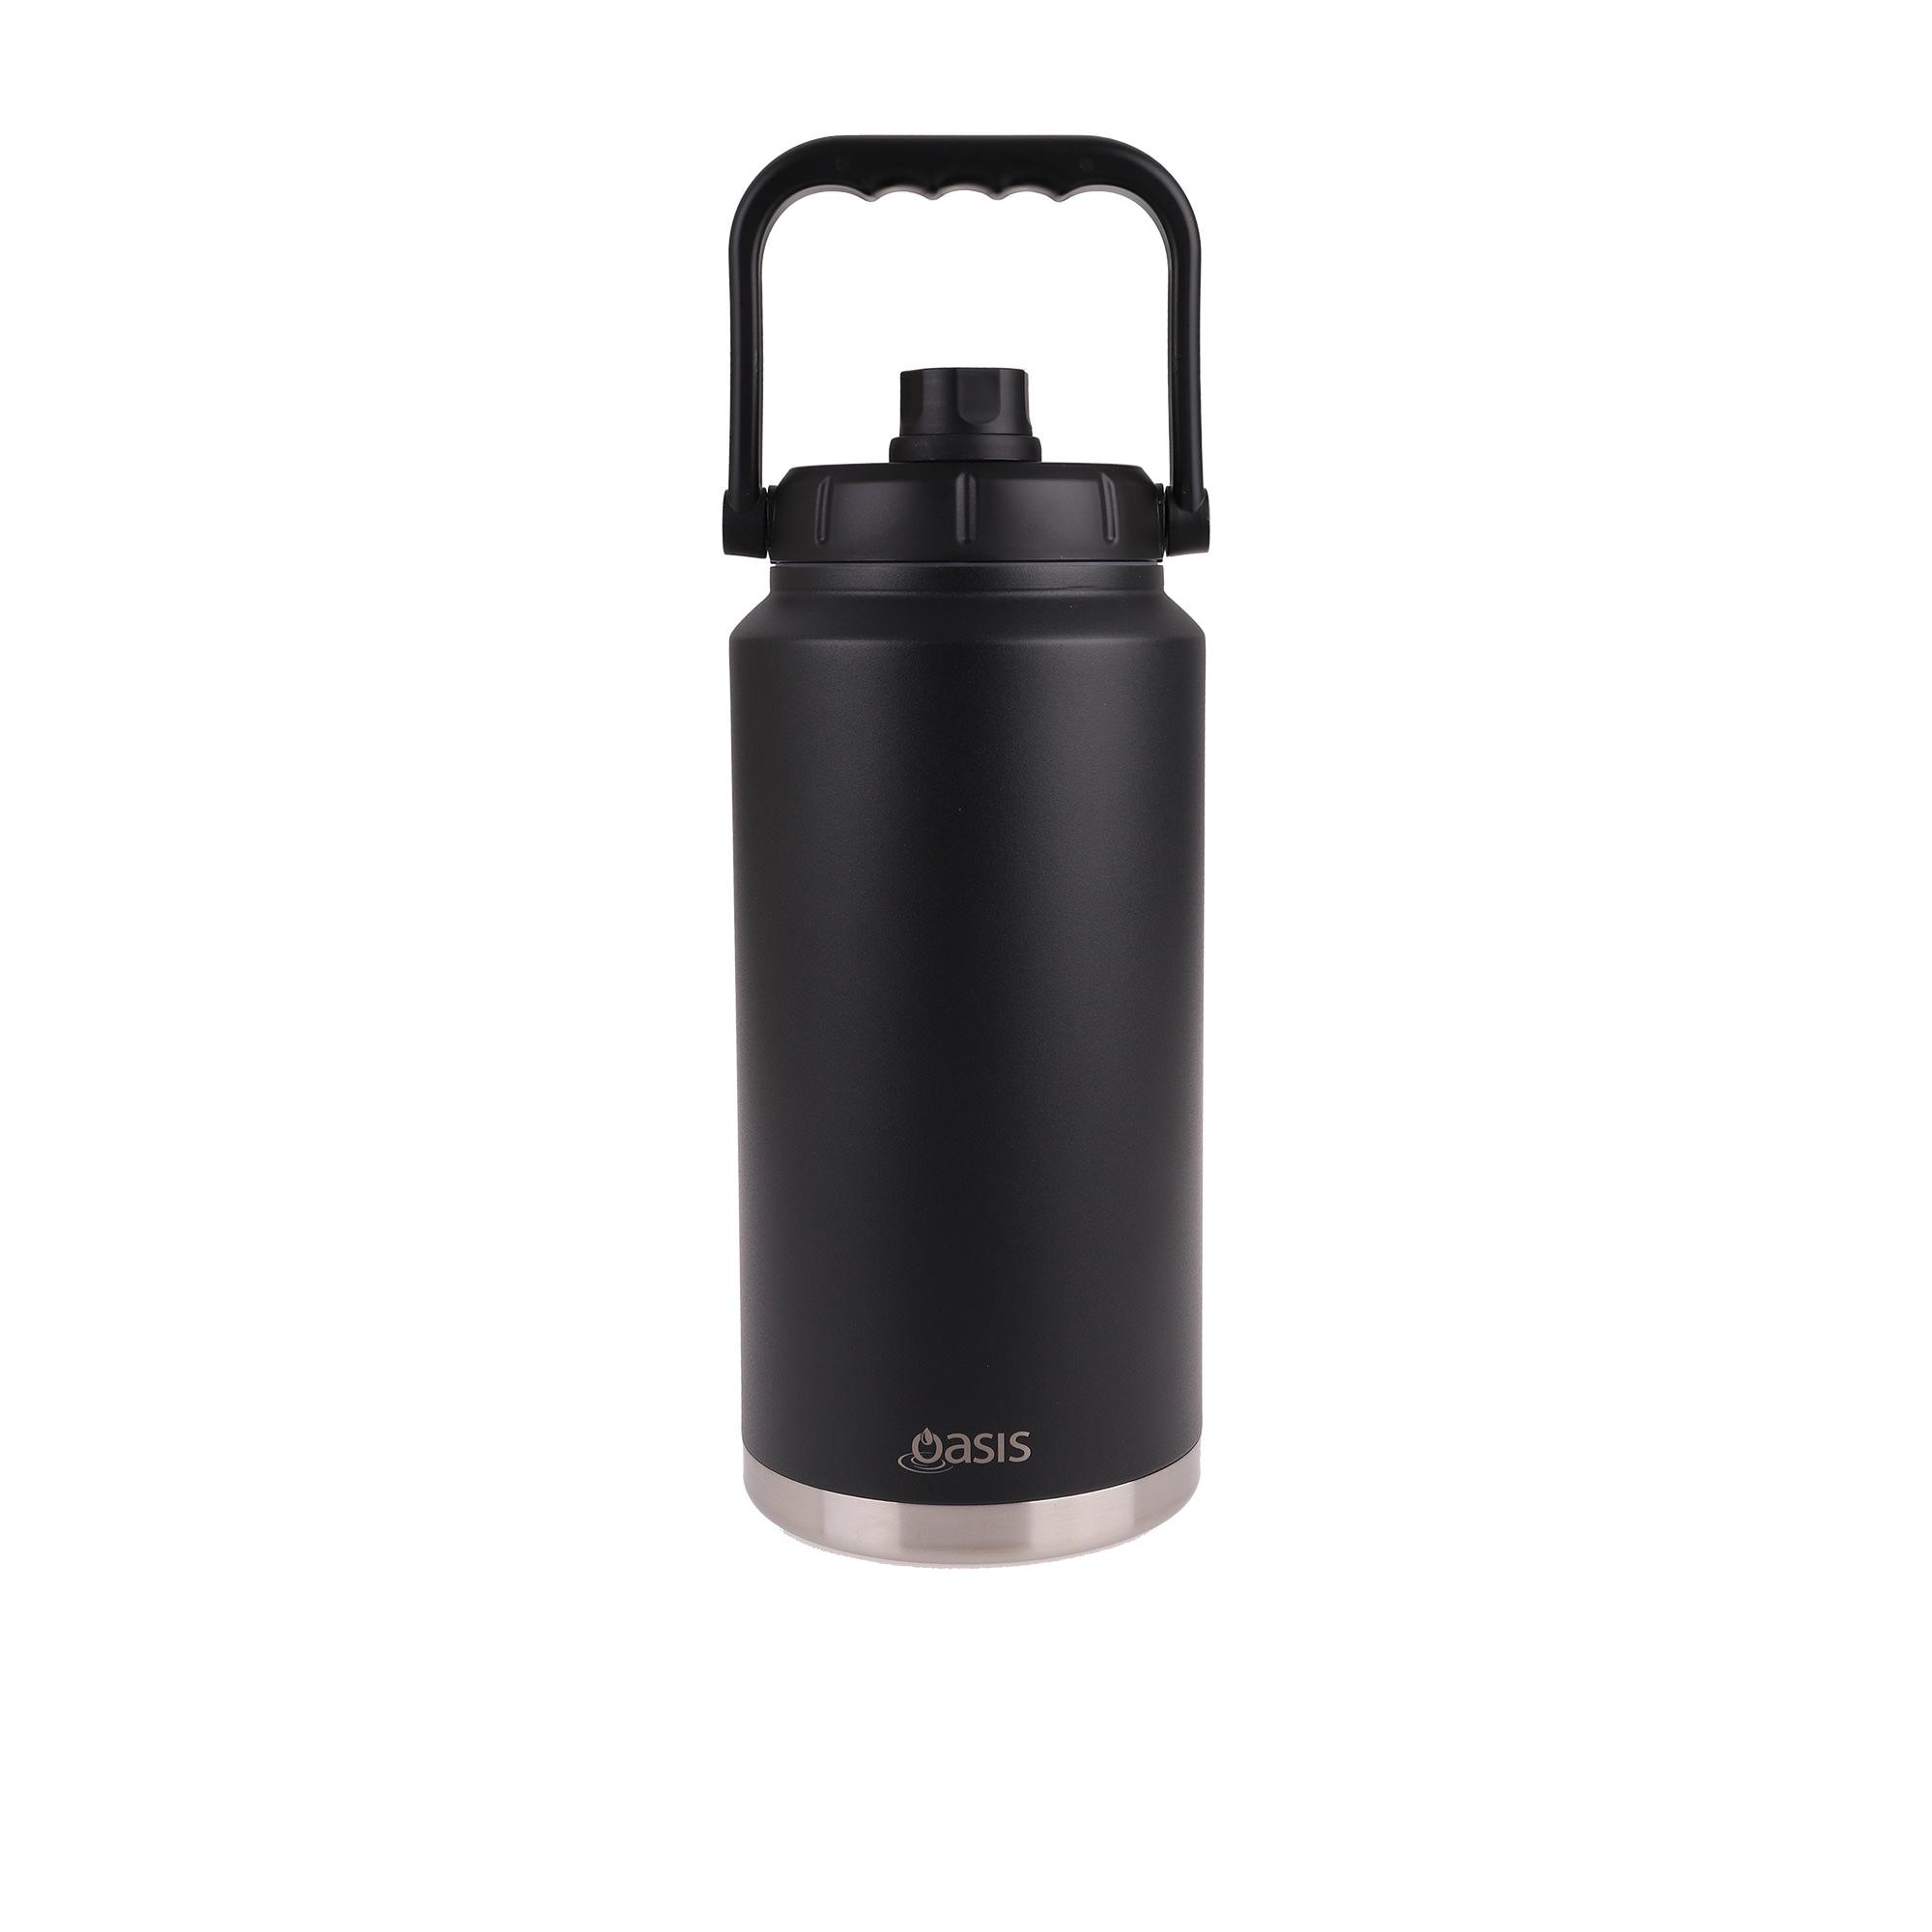 Oasis Insulated Jug with Carry Handle 3.8L Black Image 1